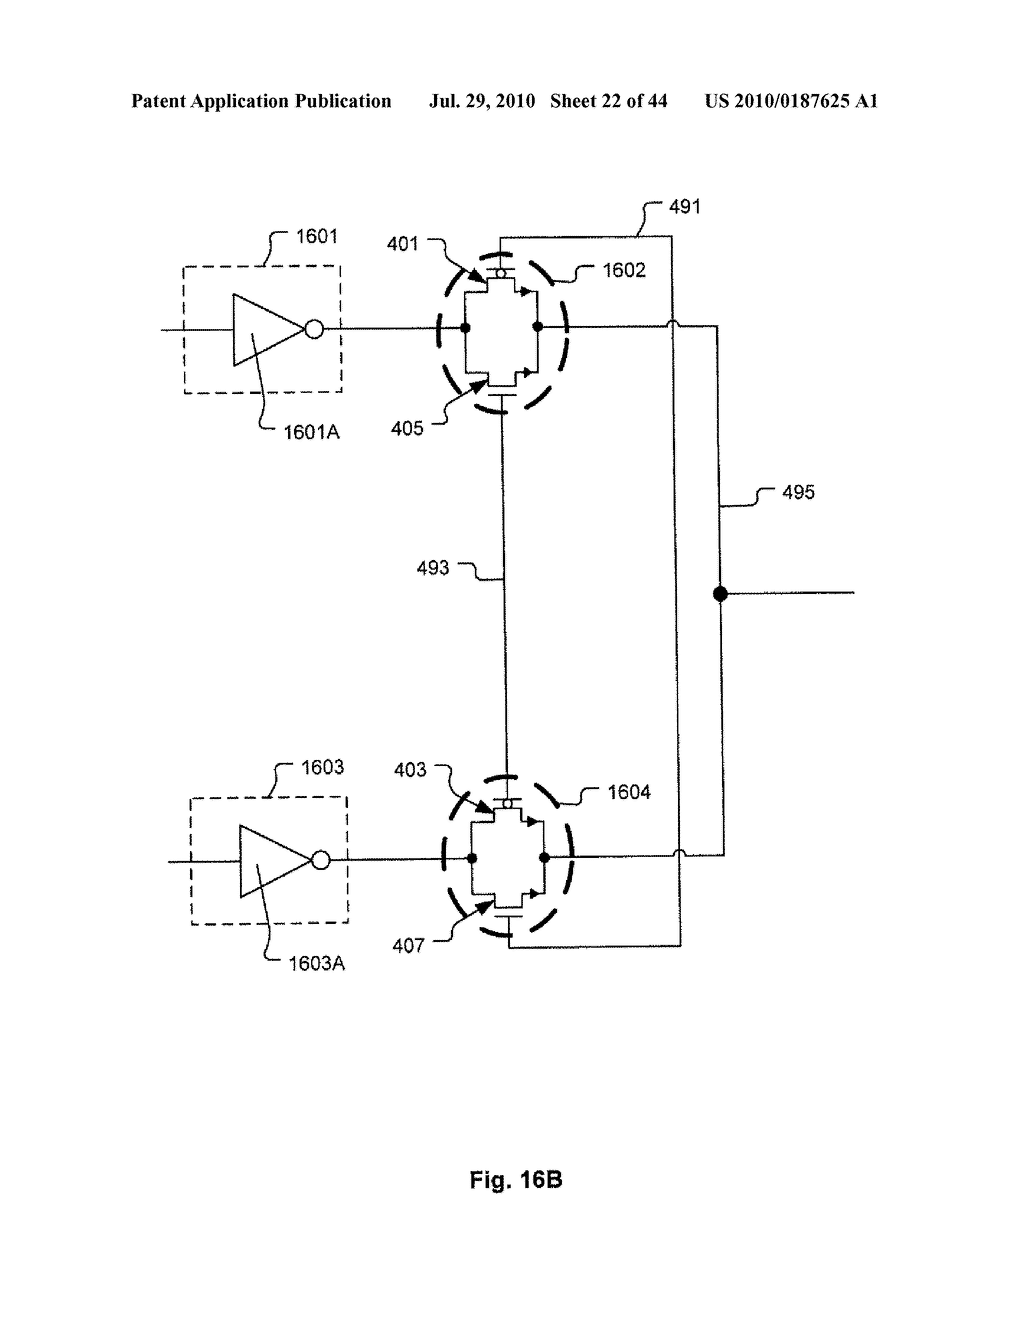 Linear Gate Level Cross-Coupled Transistor Device with Cross-Coupled Transistors Defined on Four Gate Electrode Tracks with Crossing Gate Electrode Connections - diagram, schematic, and image 23